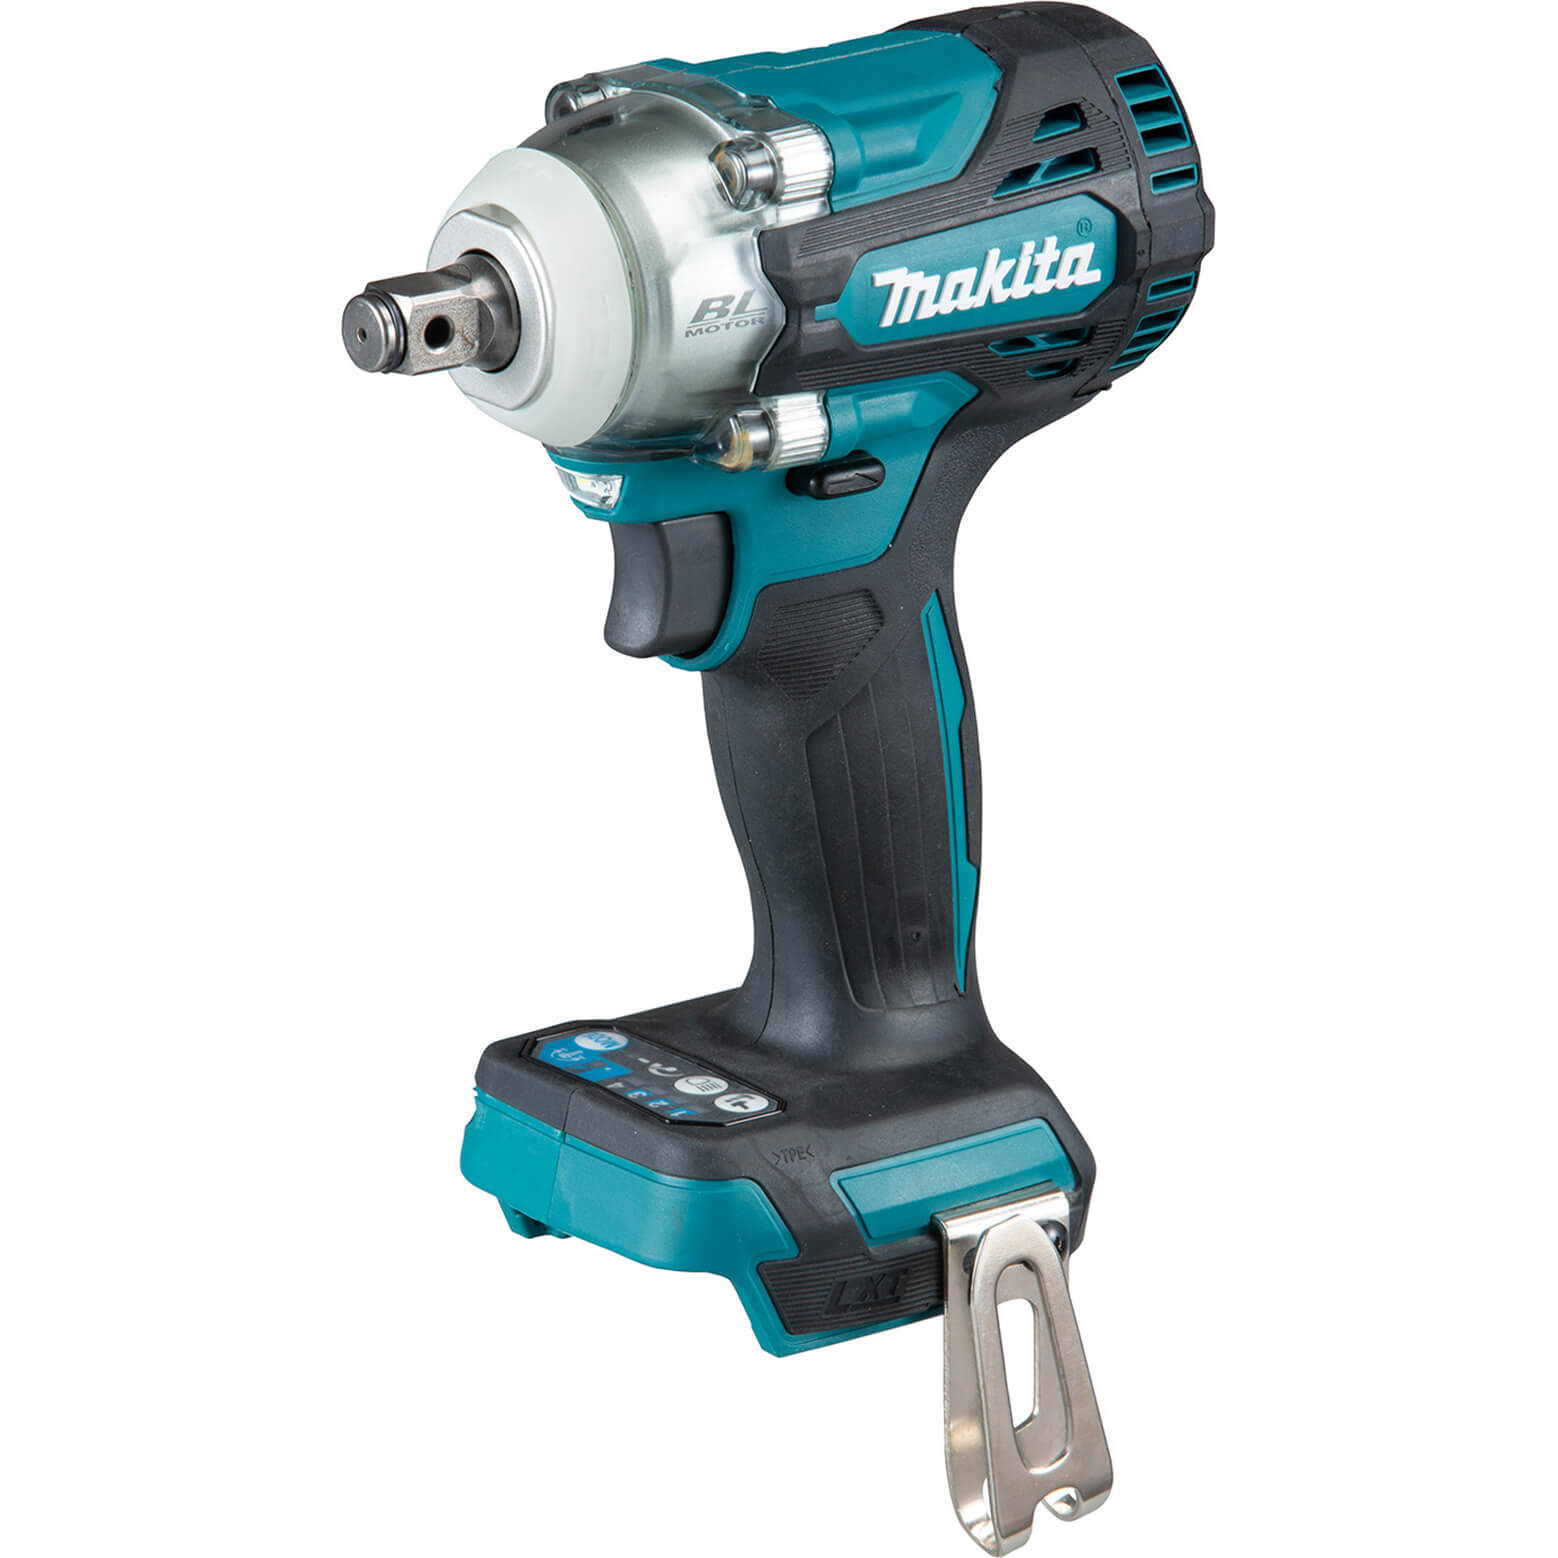 Image of Makita DTW300 18v LXT Cordless Brushless 1/2" Drive Impact Wrench No Batteries No Charger No Case